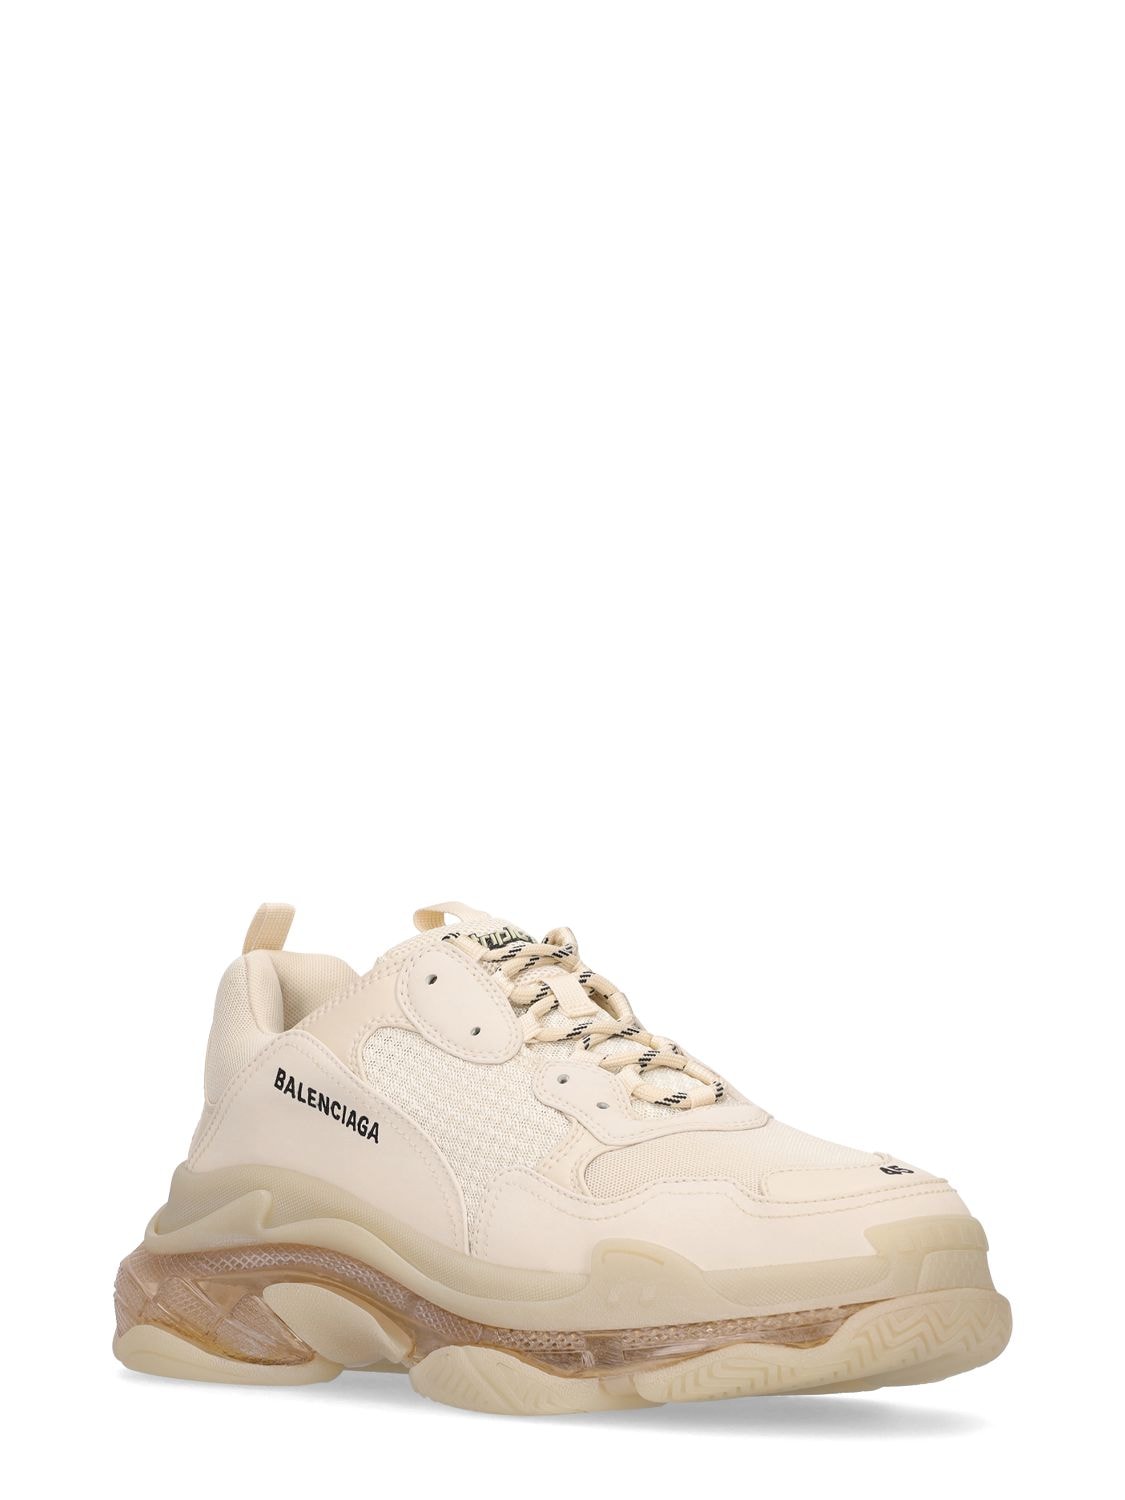 Shop Balenciaga Triple S Clear Sole Sneakers In Off White